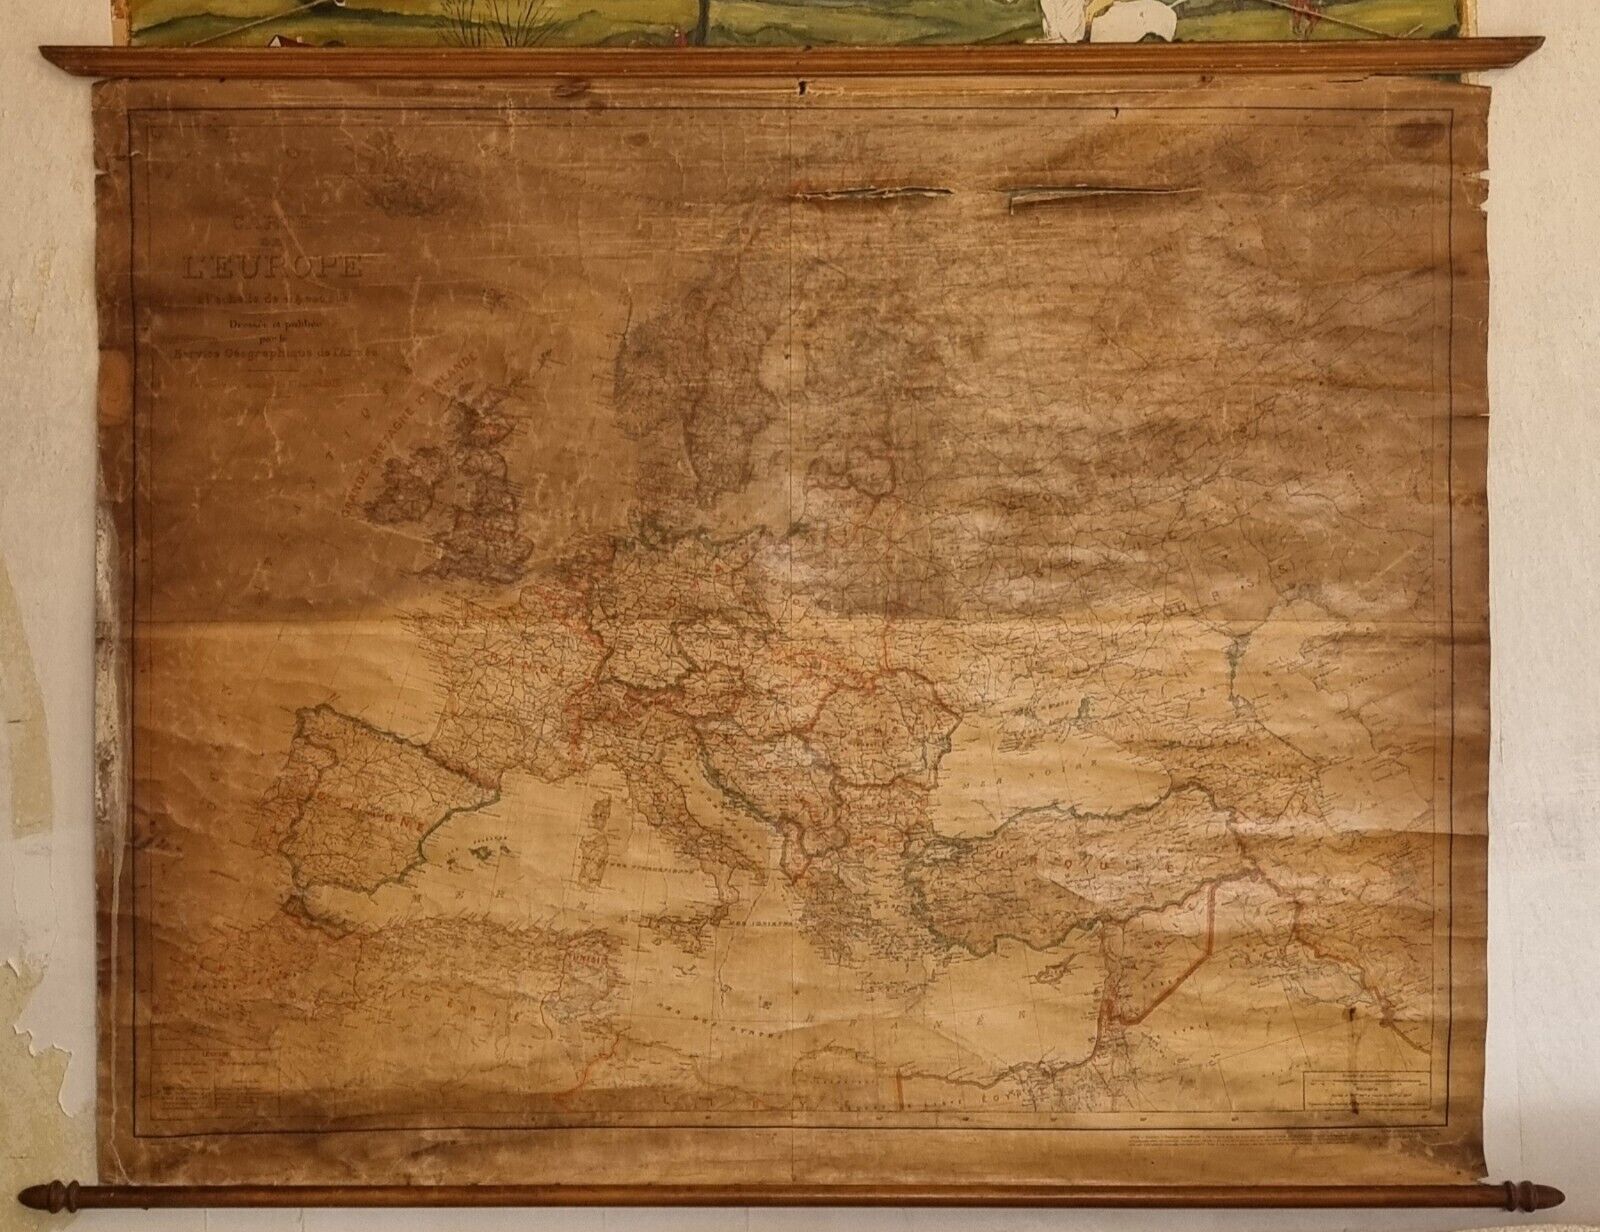 French Antique Europe Map Dating 1926 in Original Frame